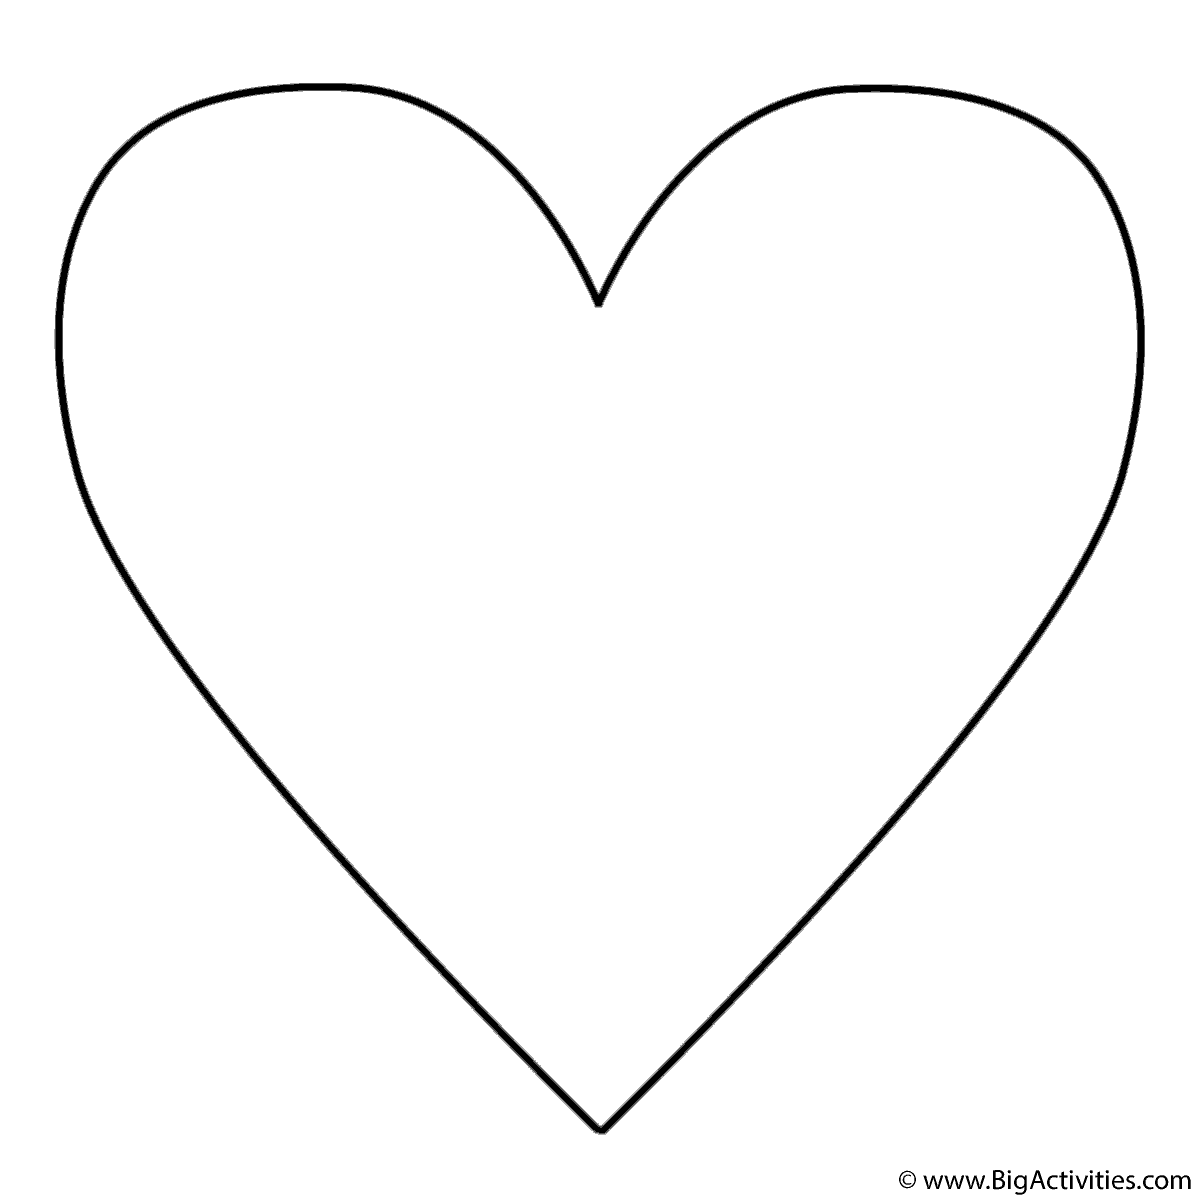 Simple Heart - Coloring Page (Valentine's Day)